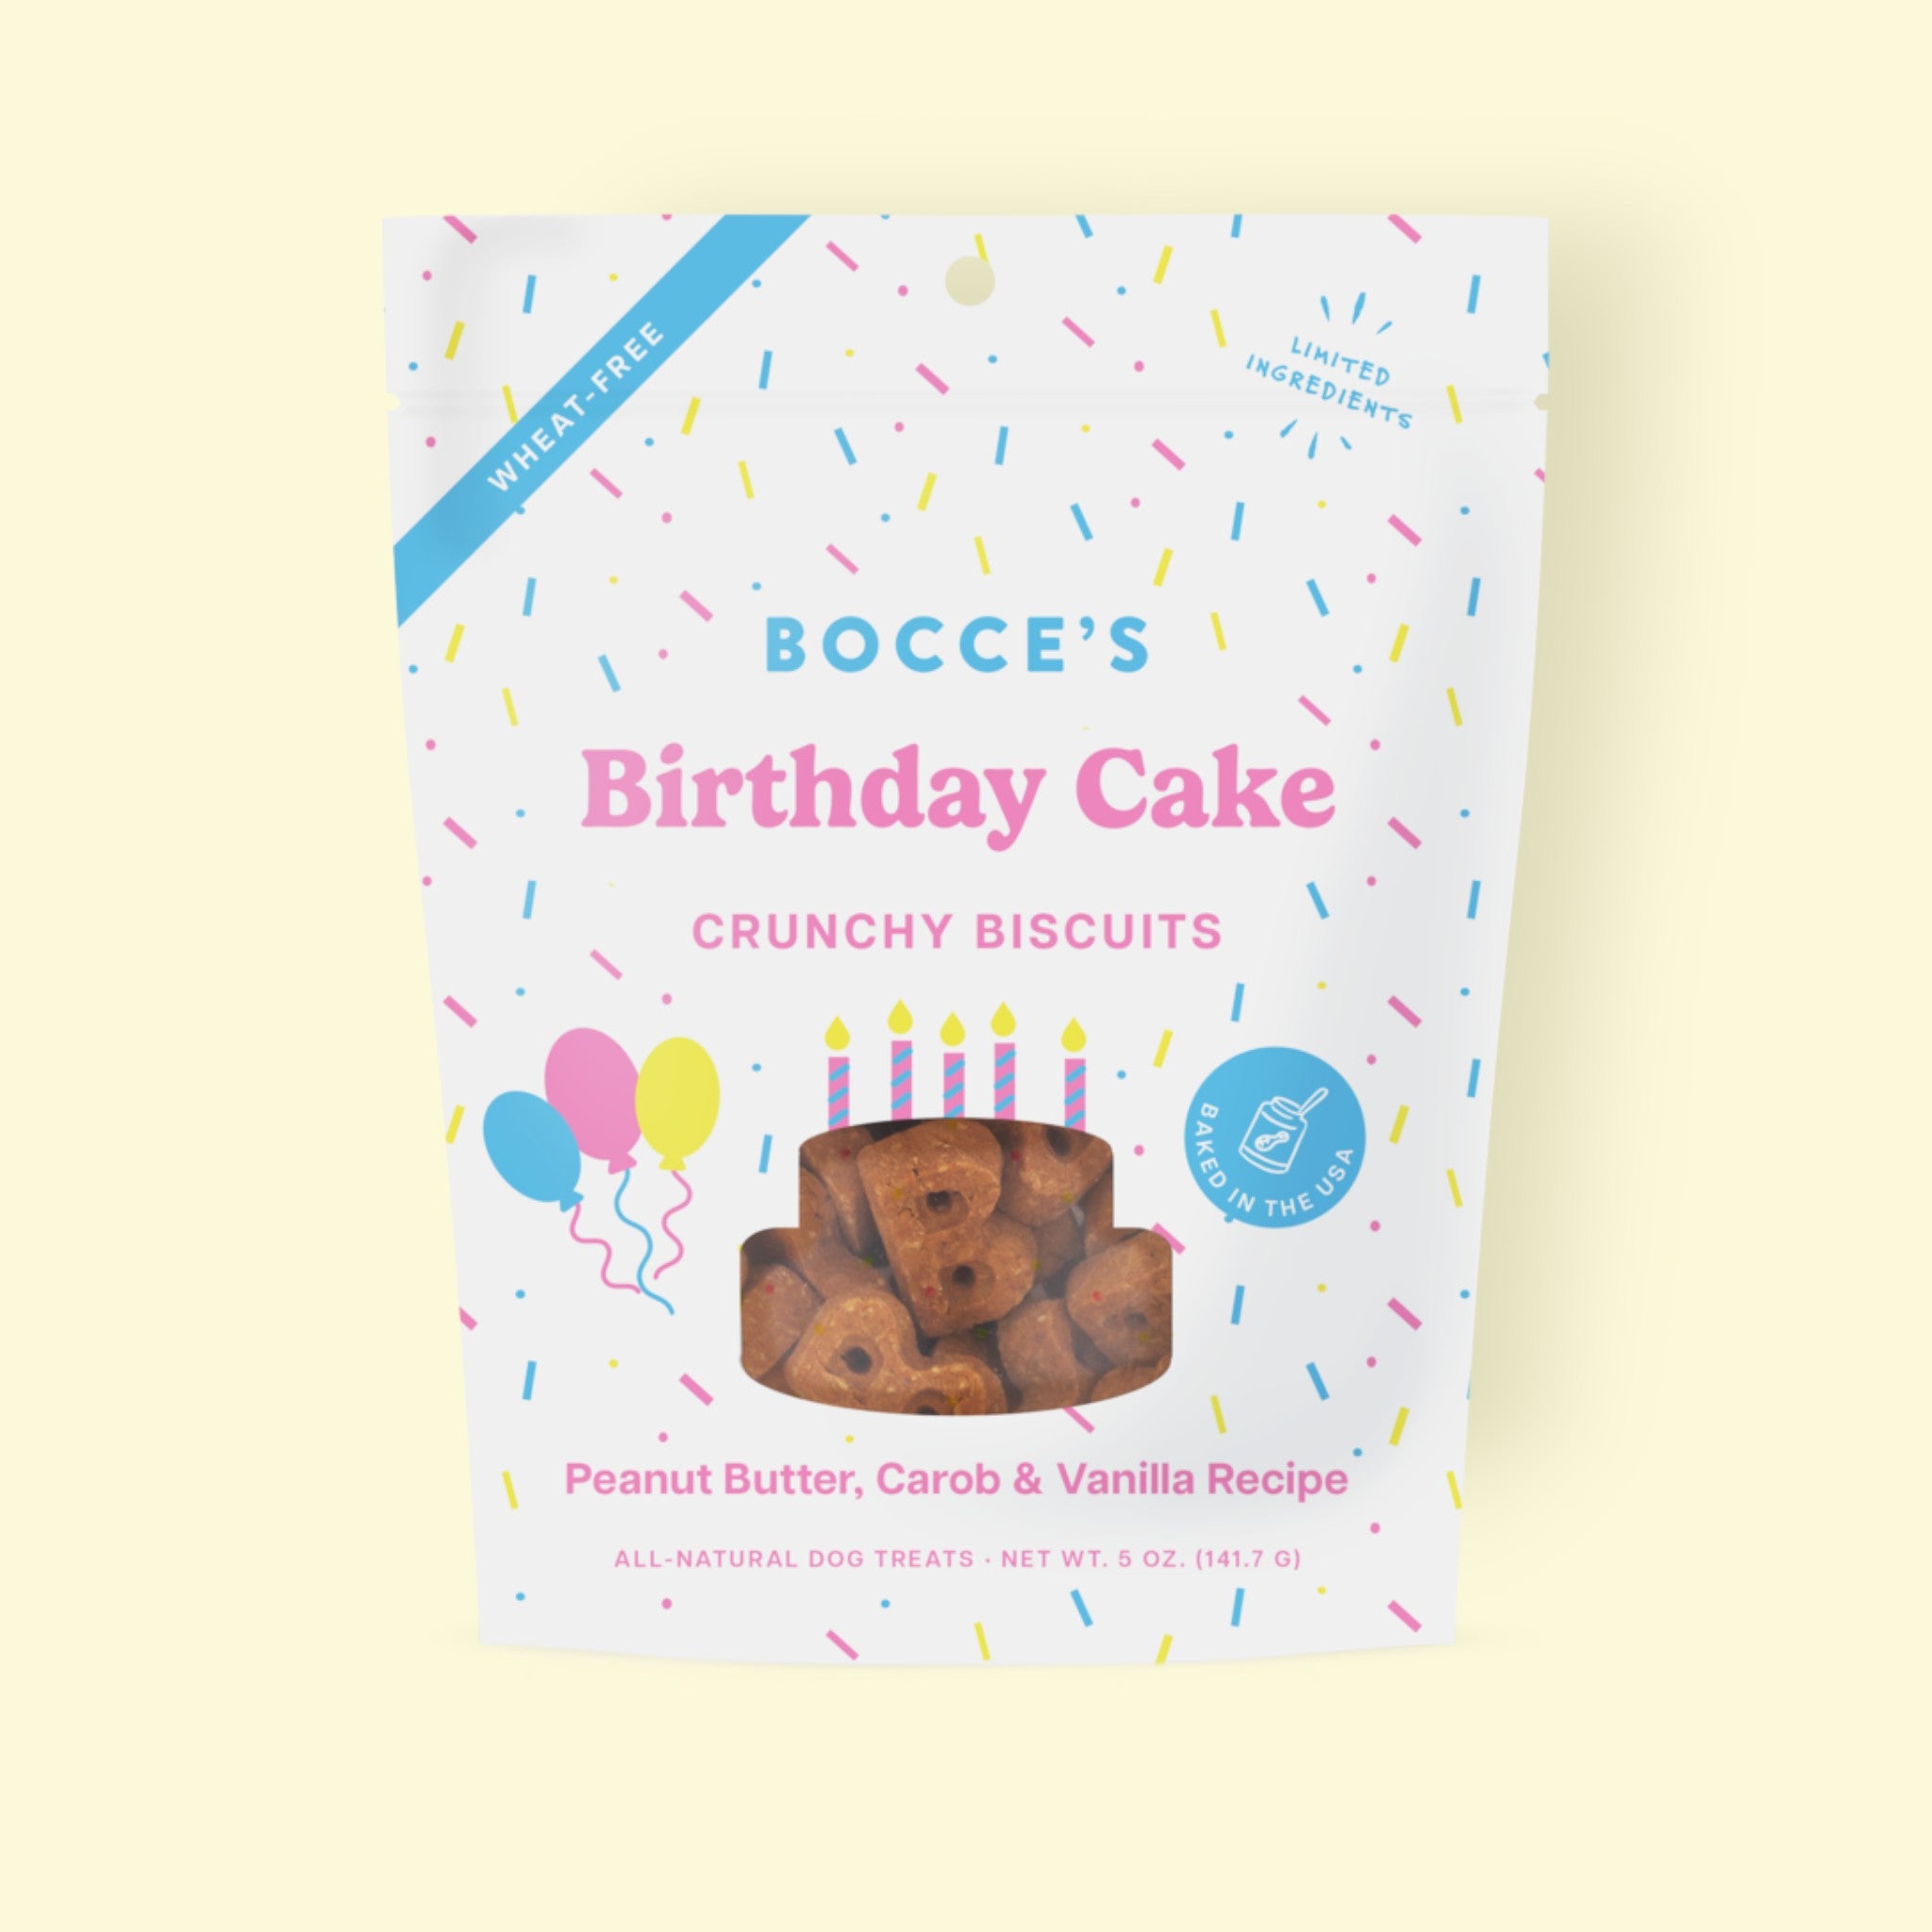 Boccee's Birthday Cake Biscuits 5oz (142g)